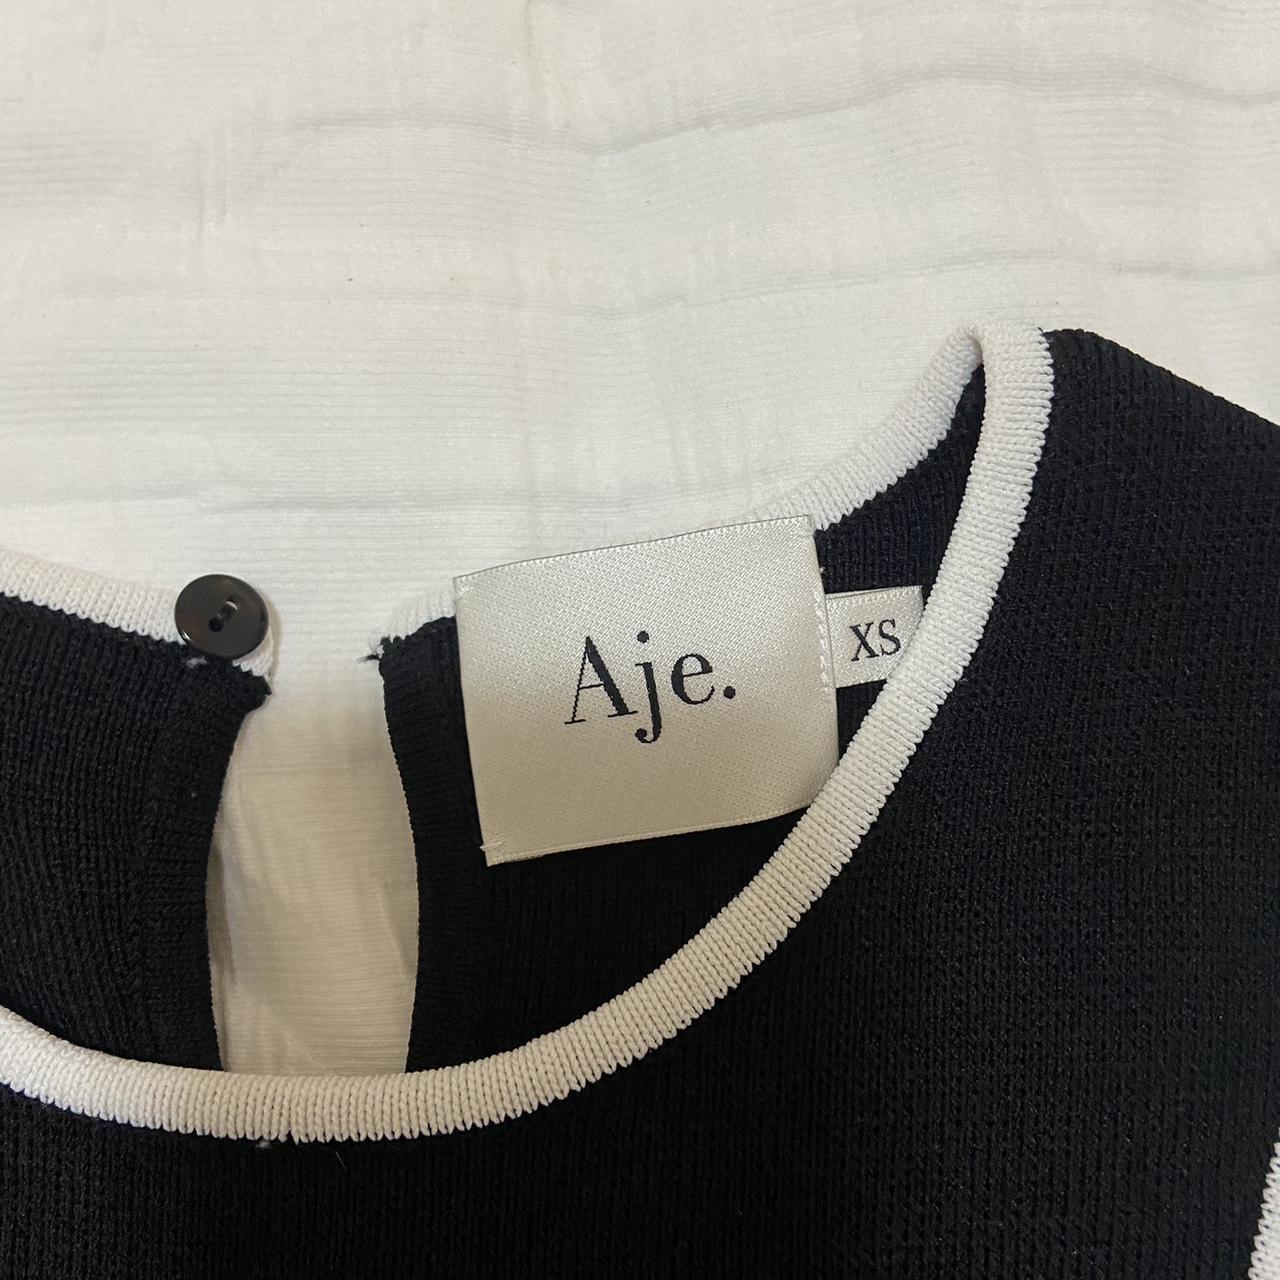 Aje Women's Black and White Top | Depop